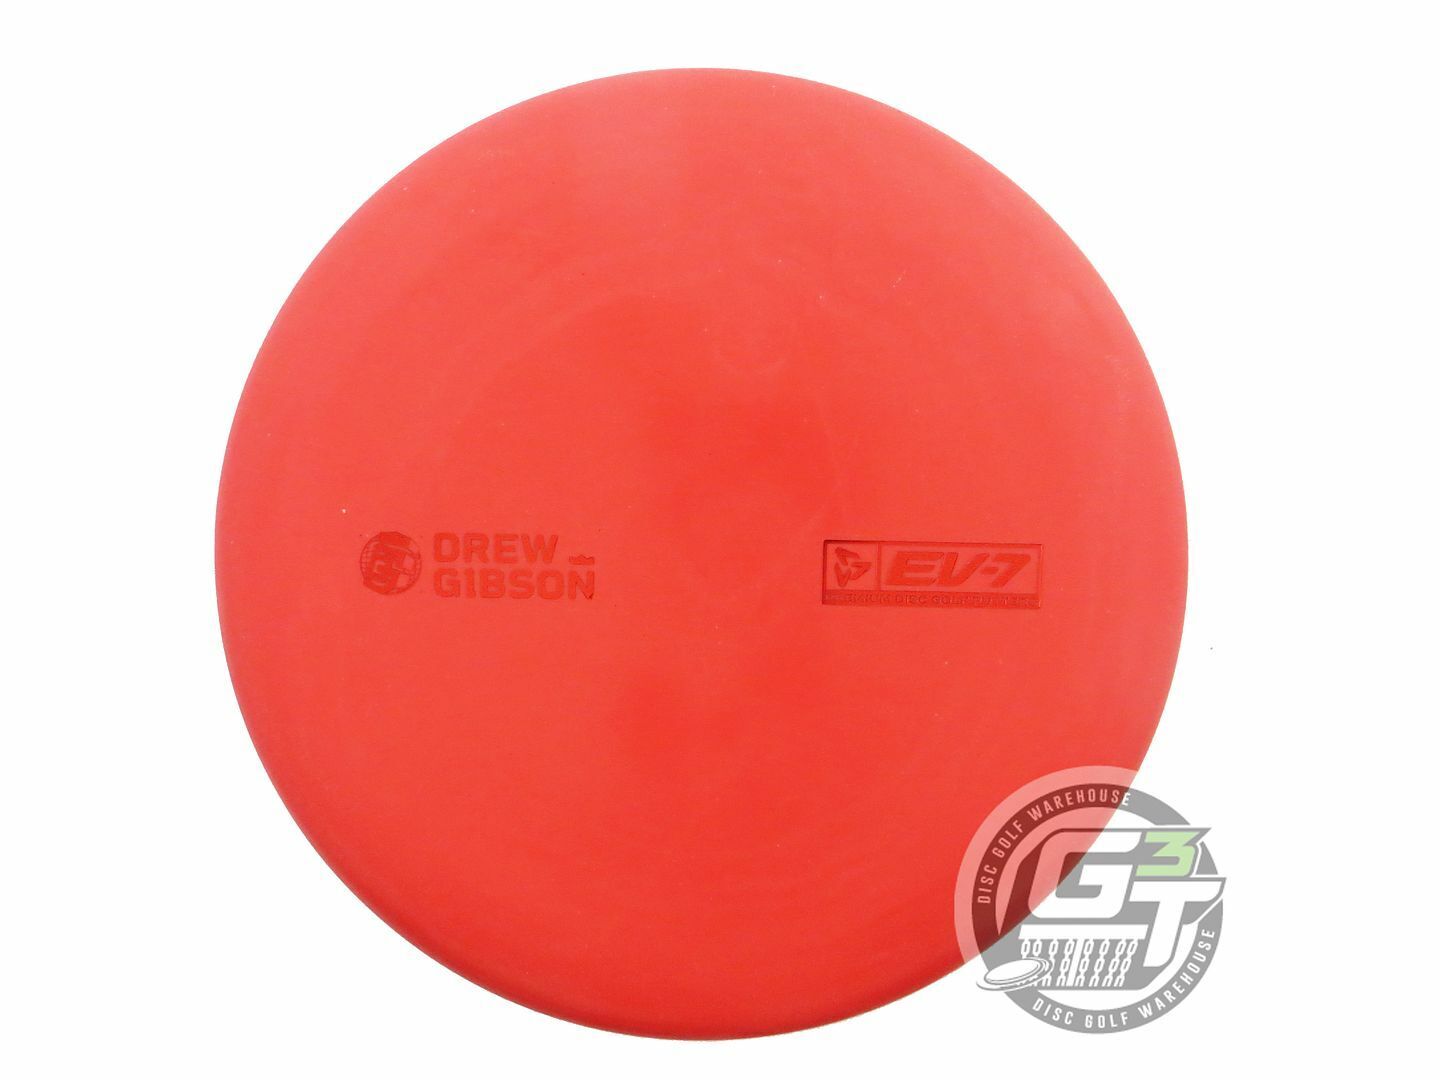 EV-7 Limited Edition 2021 Tour Series Drew Gibson OG Soft Penrose Putter Golf Disc (Individually Listed)